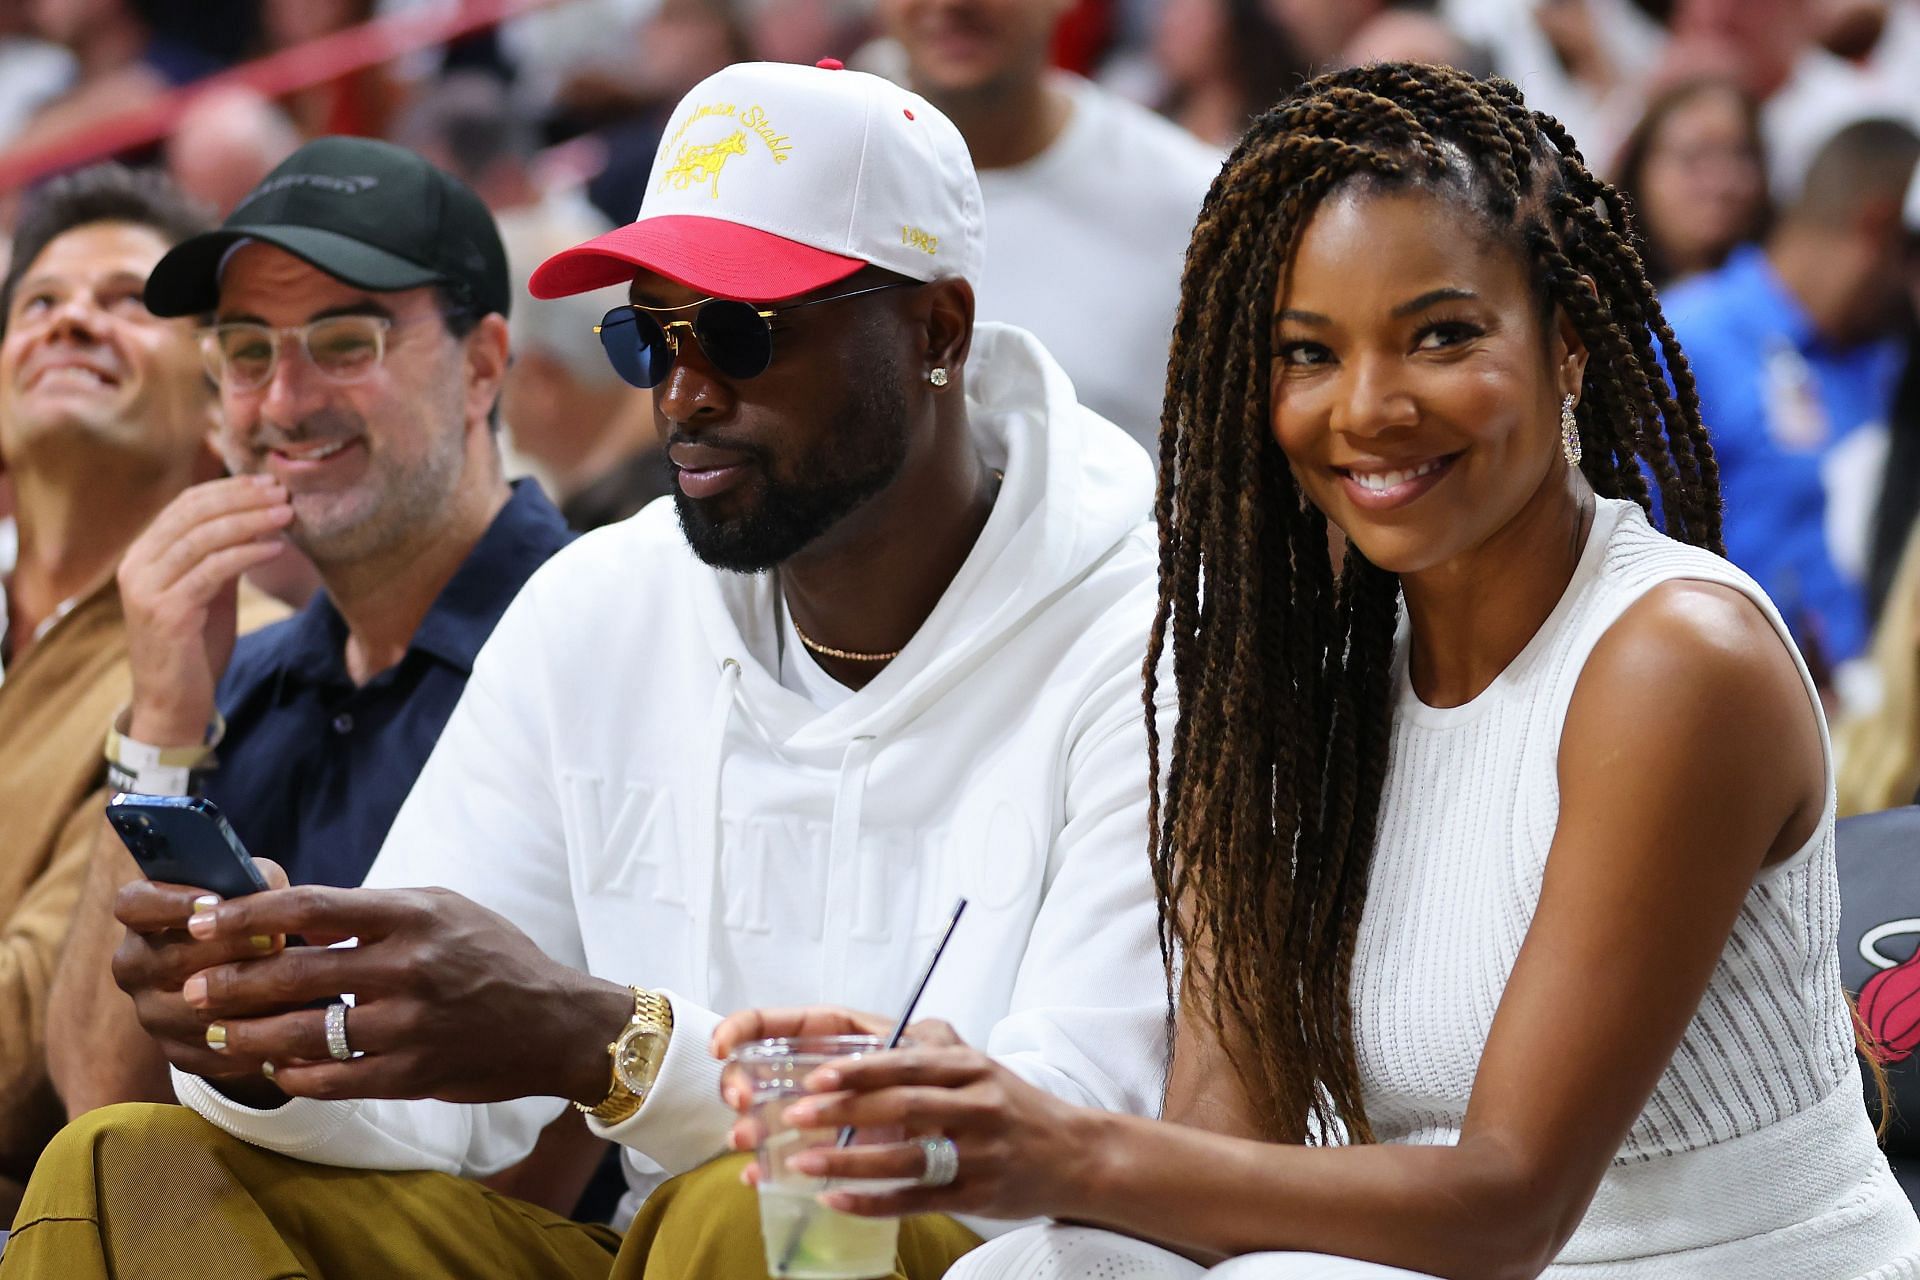 Dwyane Wade's ex-wife is trying to stop their daughter's legal